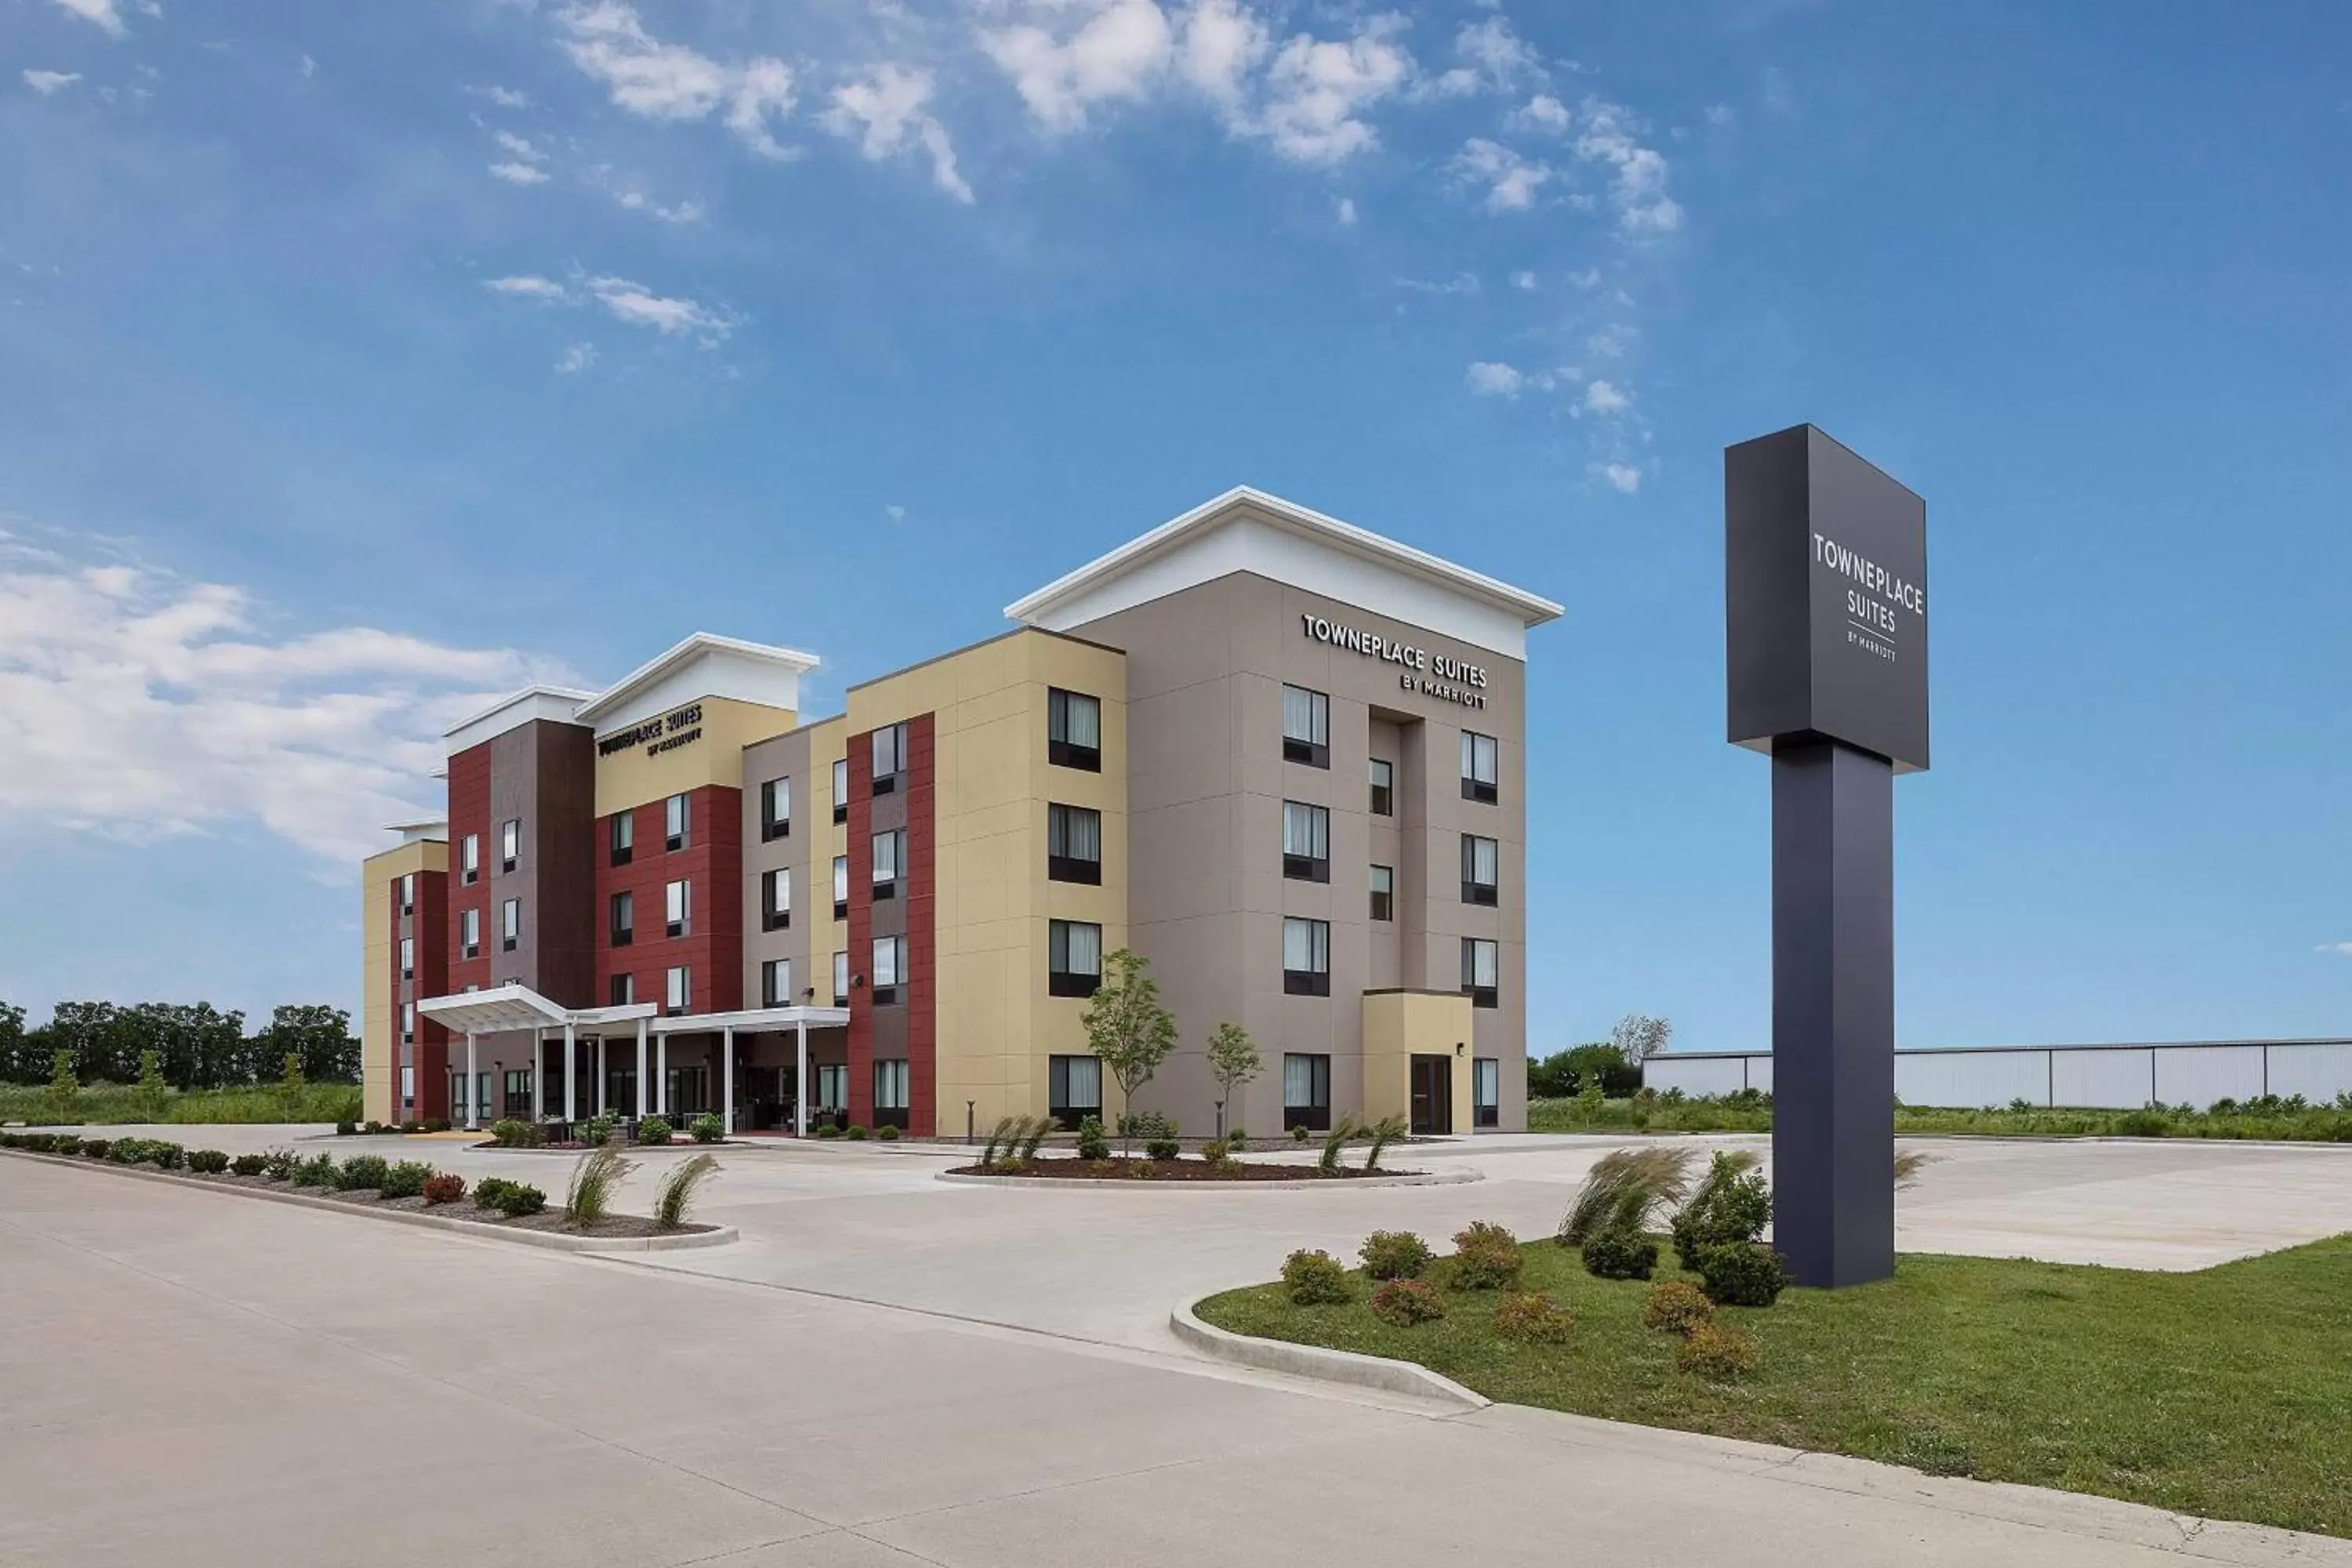 Property Building in TownePlace Suites by Marriott Danville